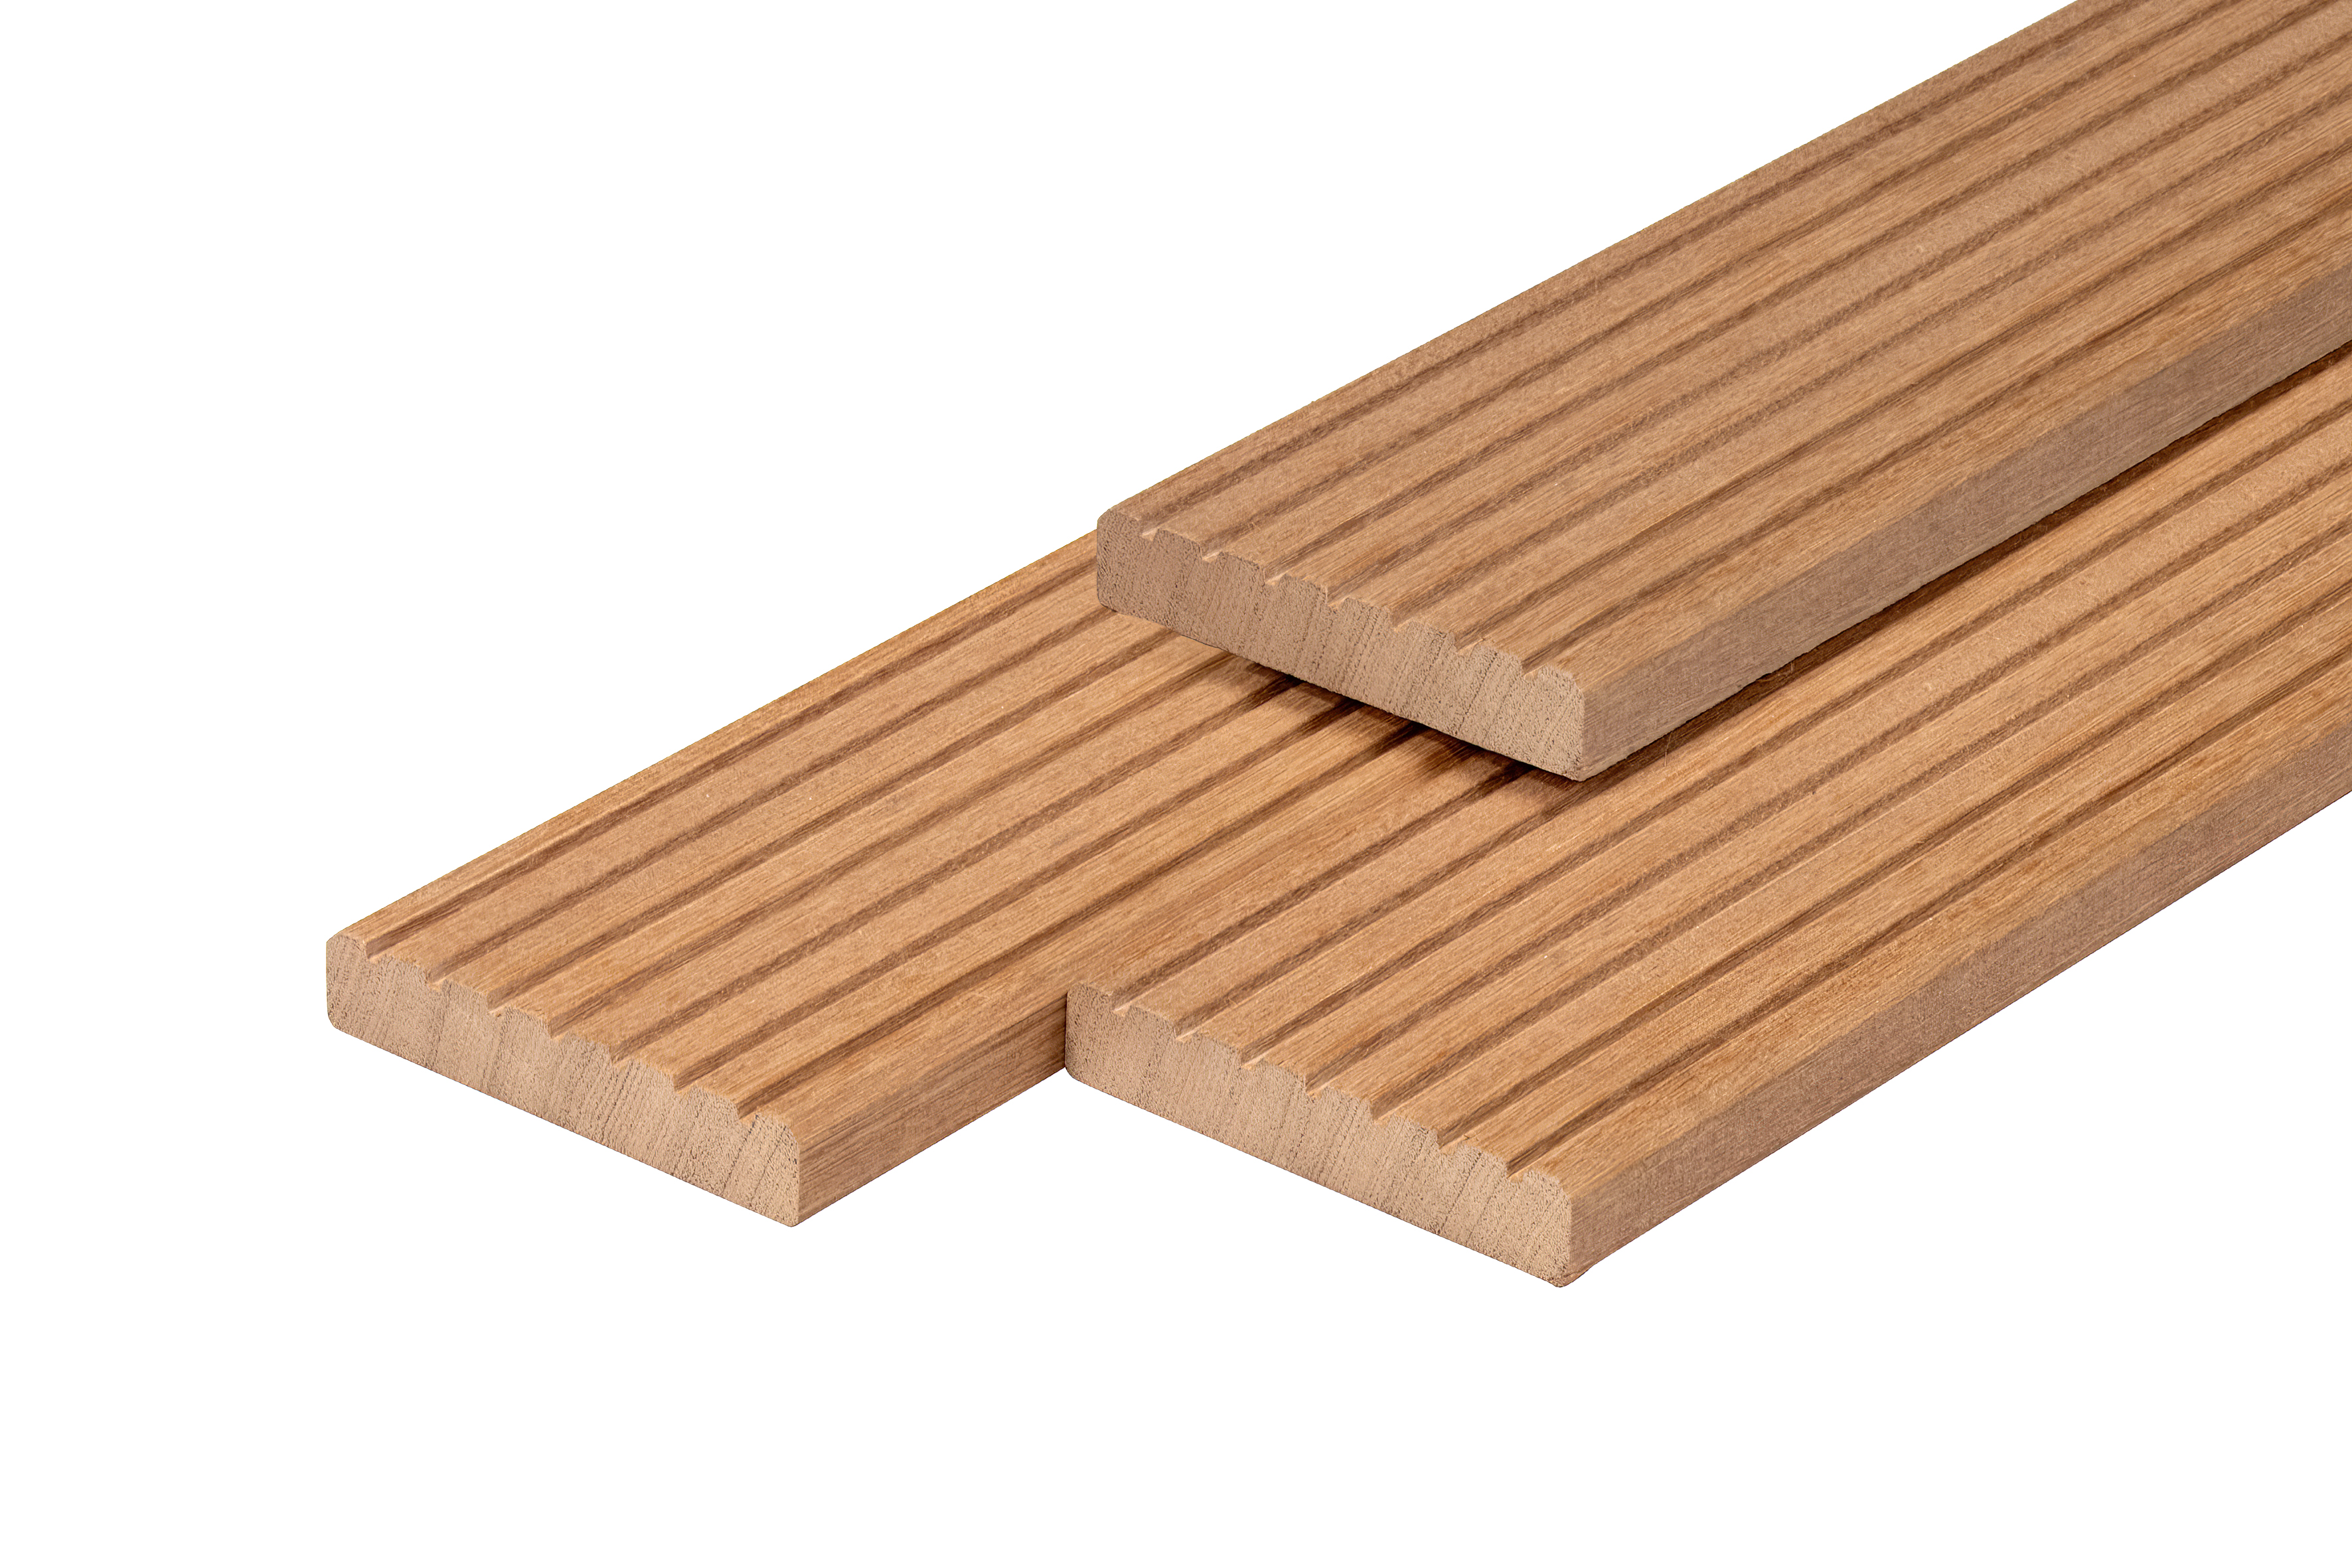 Bangkirai decking board dried 2.5x14.5x400 cm planed 7 grooves + 1 side smooth